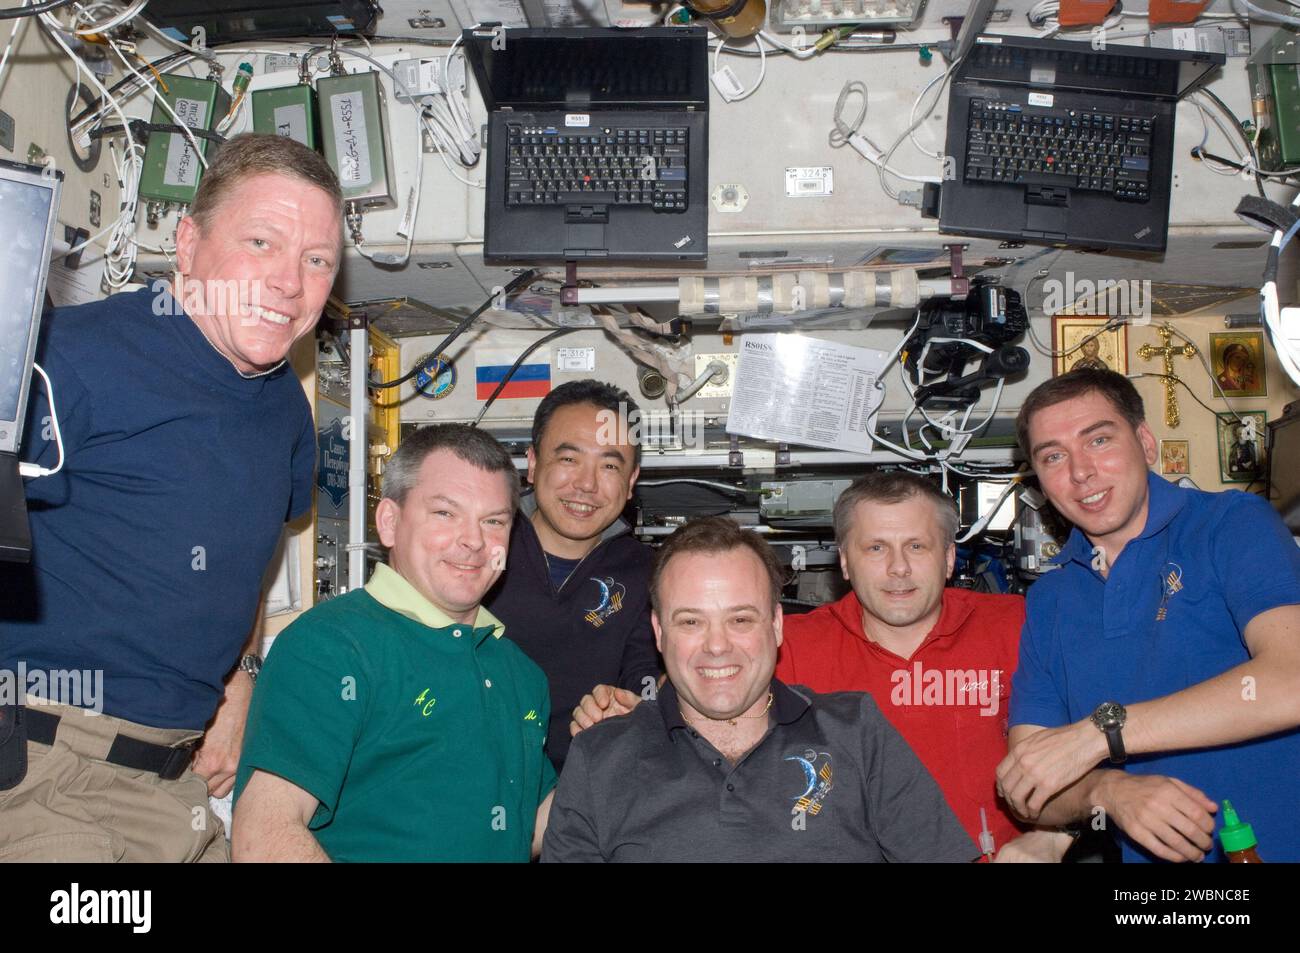 ISS028-E-009701 (25 June 2011) --- Expedition 28 crew members pose for a photo in the Zvezda Service Module of the International Space Station. Pictured from the left are NASA astronaut Mike Fossum, Russian cosmonaut Alexander Samokutyaev, Japan Aerospace Exploration Agency astronaut Satoshi Furukawa, NASA astronaut Ron Garan, all flight engineers; Russian cosmonaut Andrey Borisenko, commander; and Russian cosmonaut Sergei Volkov, flight engineer. Stock Photo